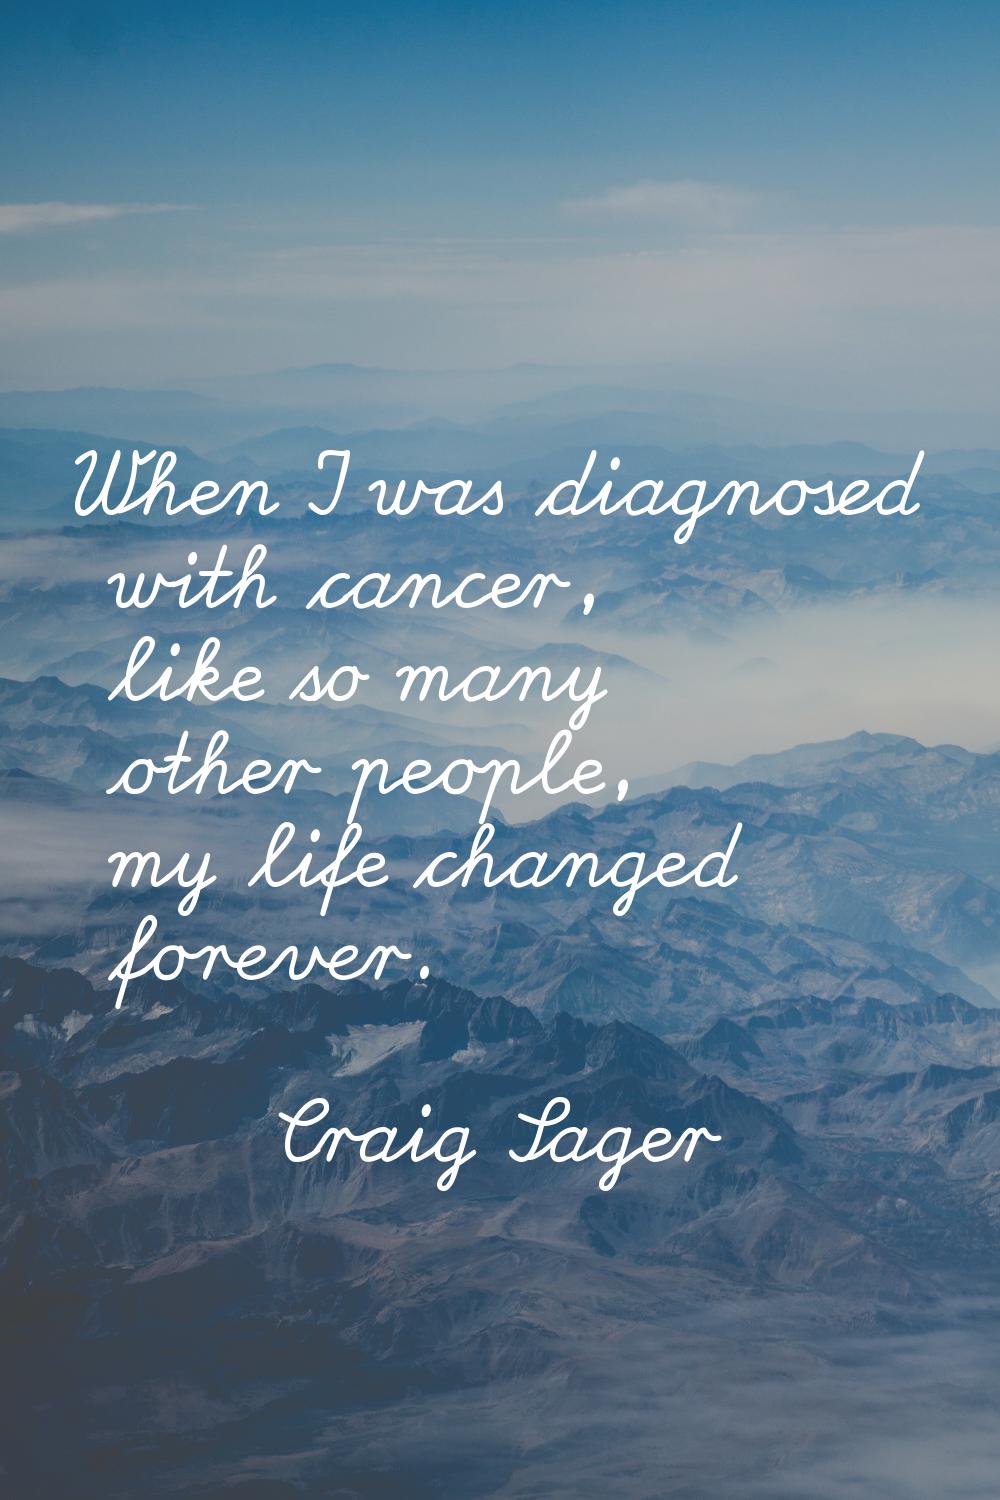 When I was diagnosed with cancer, like so many other people, my life changed forever.